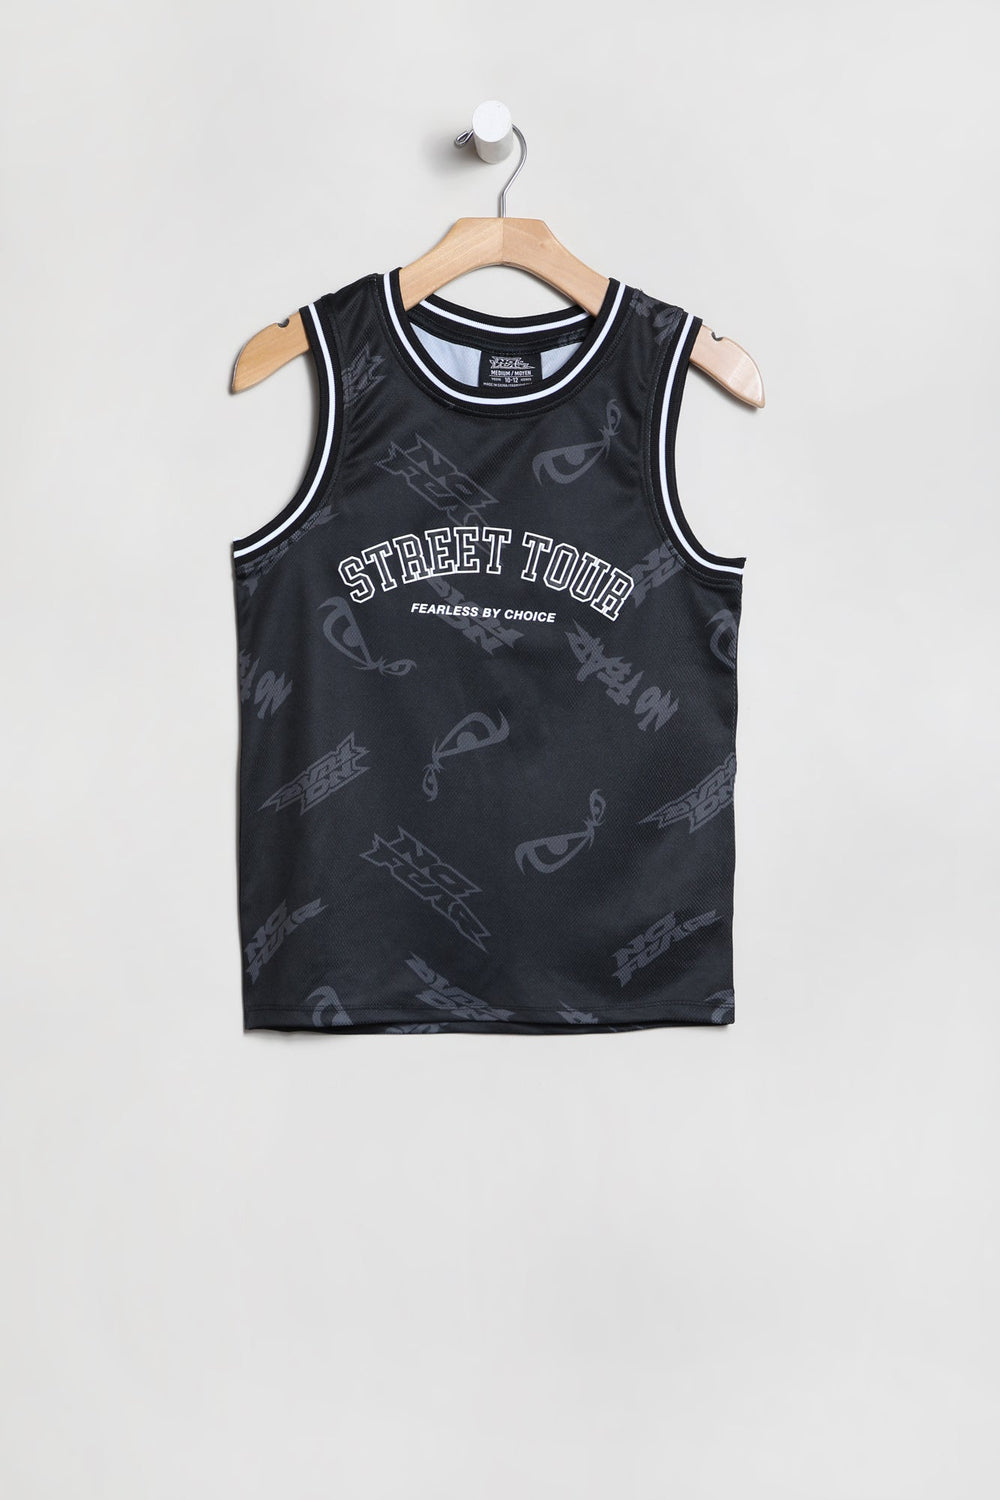 No Fear Youth Printed Basketball Jersey Tank Top No Fear Youth Printed Basketball Jersey Tank Top